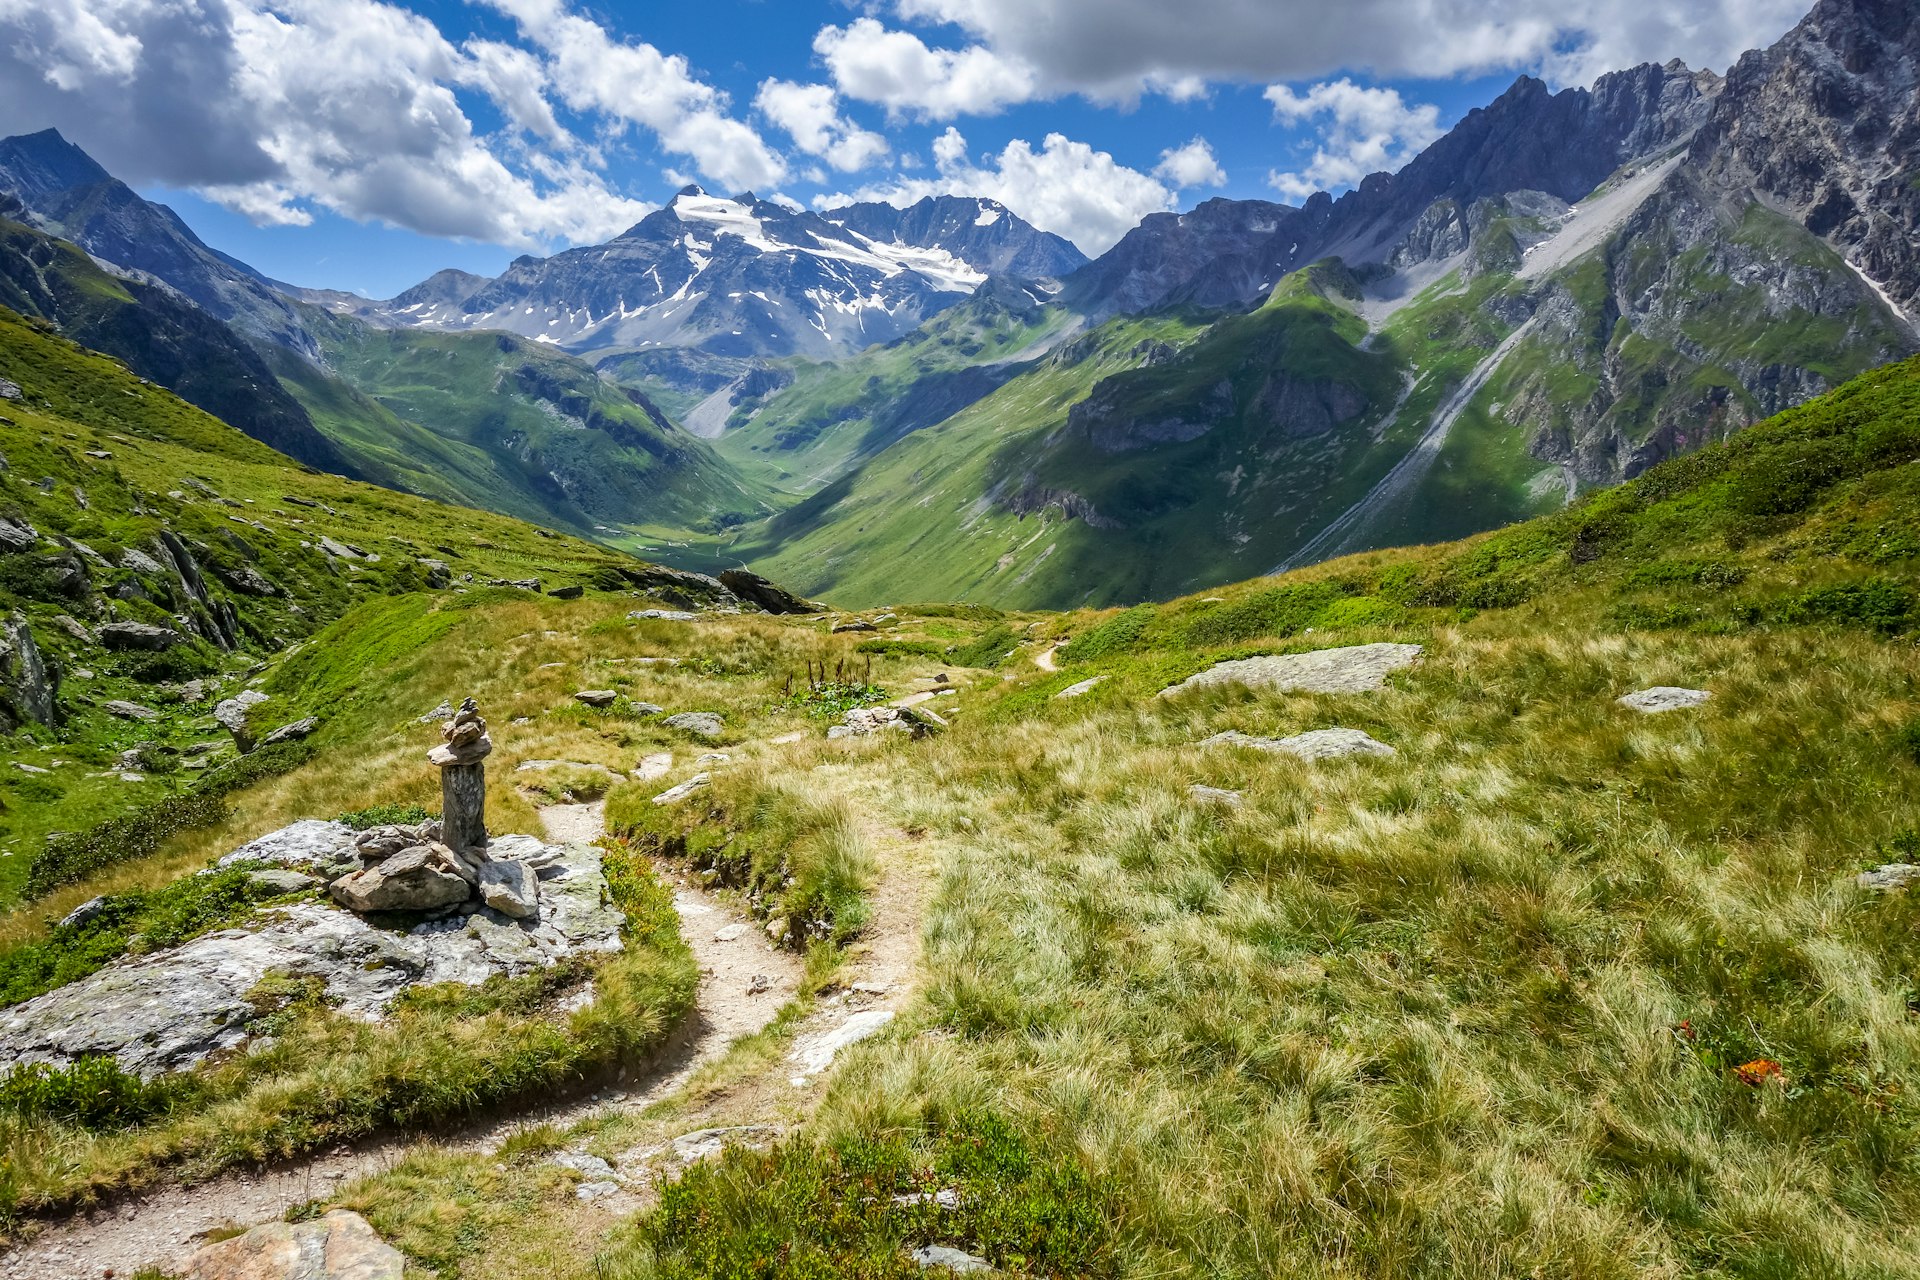 A rugged trail winds through a rocky, grassy alpine landscape, with snow-dusted mountains in the distance